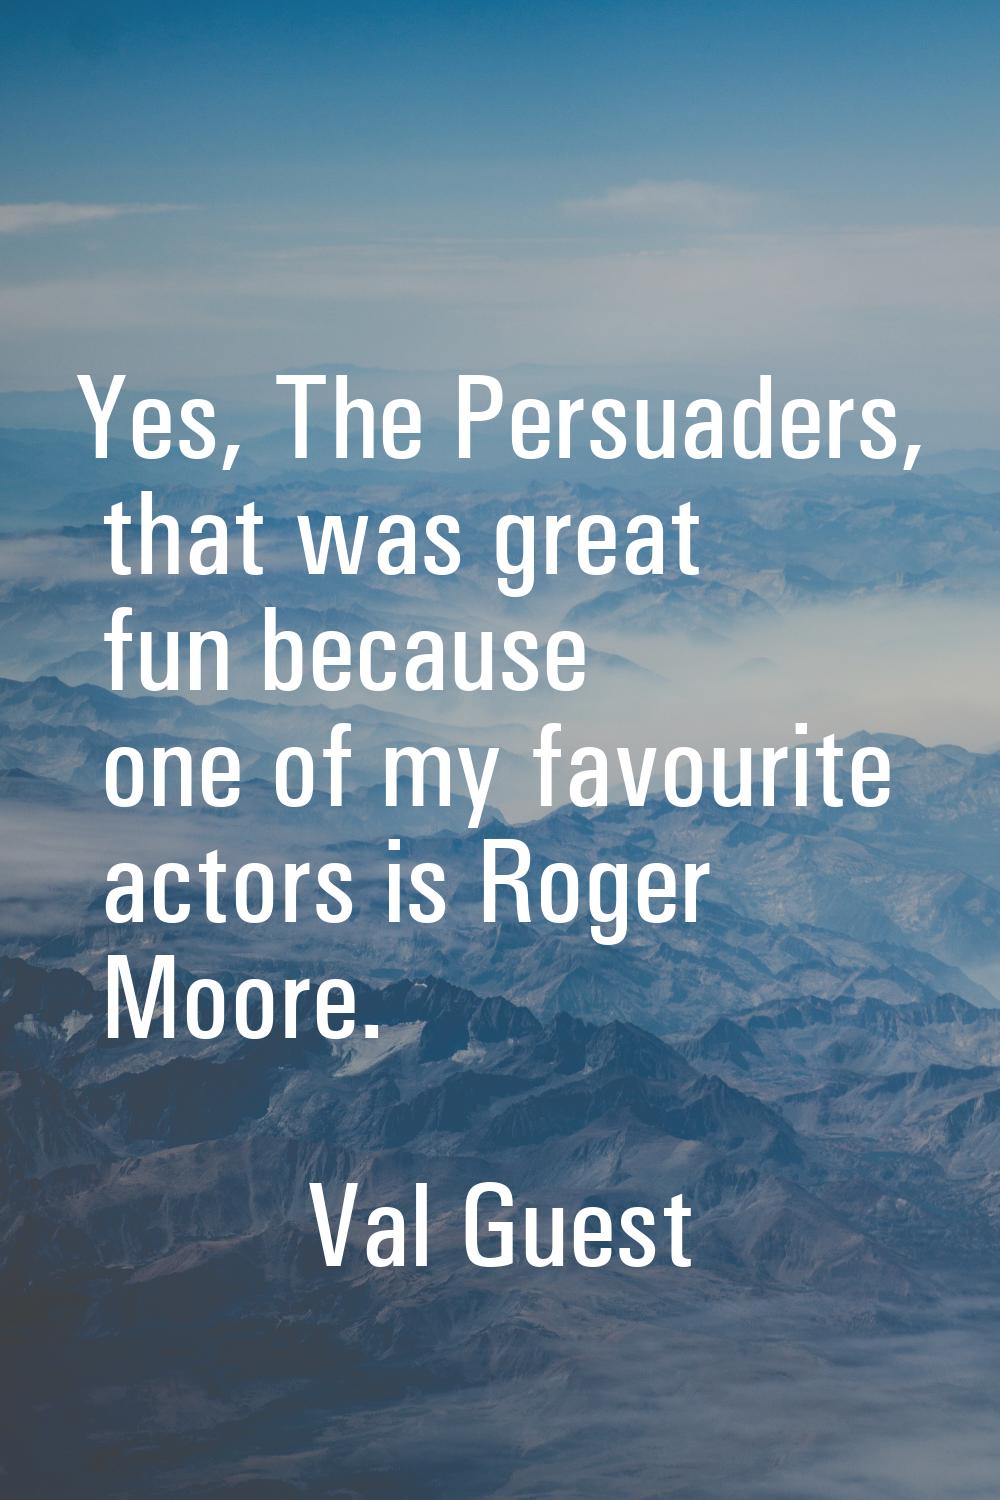 Yes, The Persuaders, that was great fun because one of my favourite actors is Roger Moore.